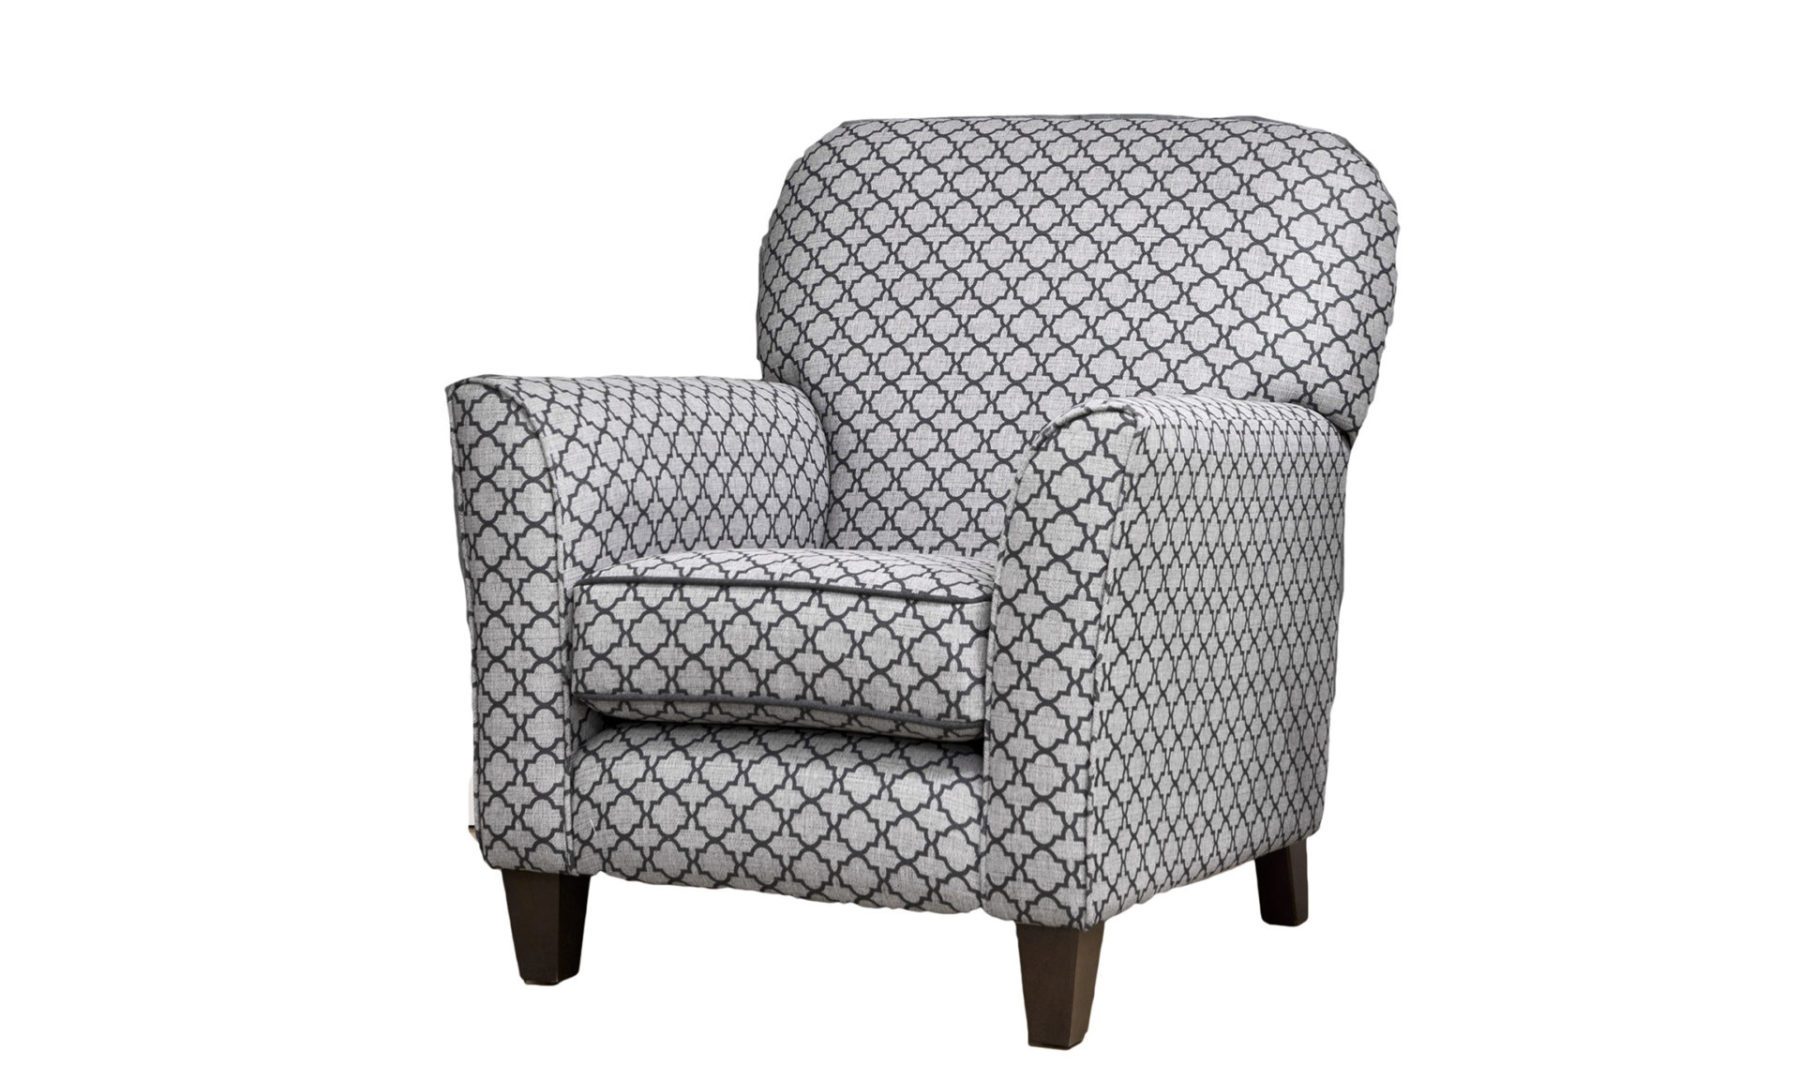 Dylan Chair in Digital Trellis Jet, Clearance Fabric